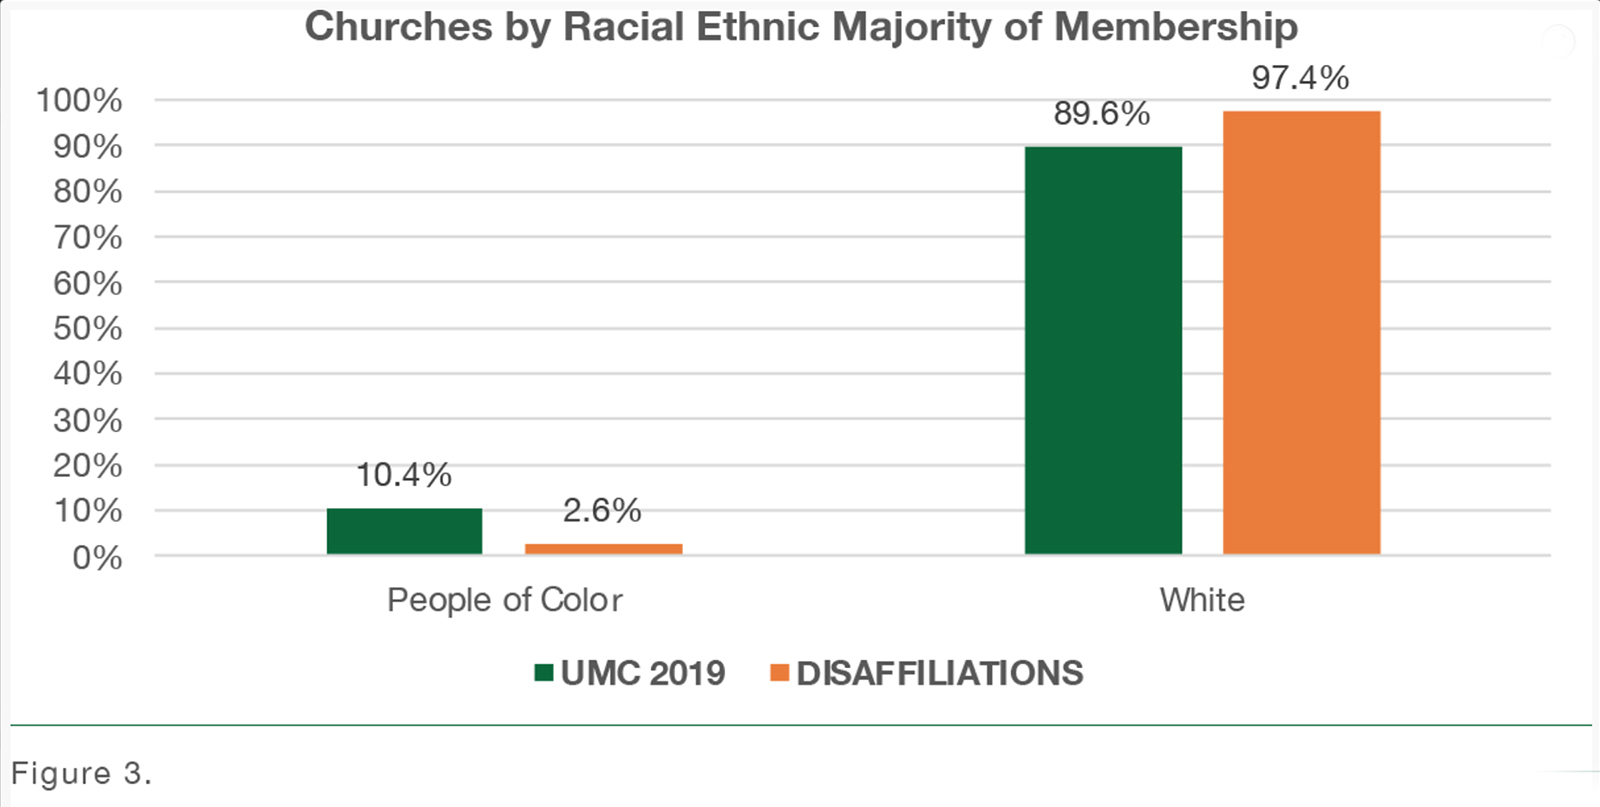 "Churches by Racial Ethnical Majority of Membership" (Graphic courtesy Lewis Center for Church Leadership)